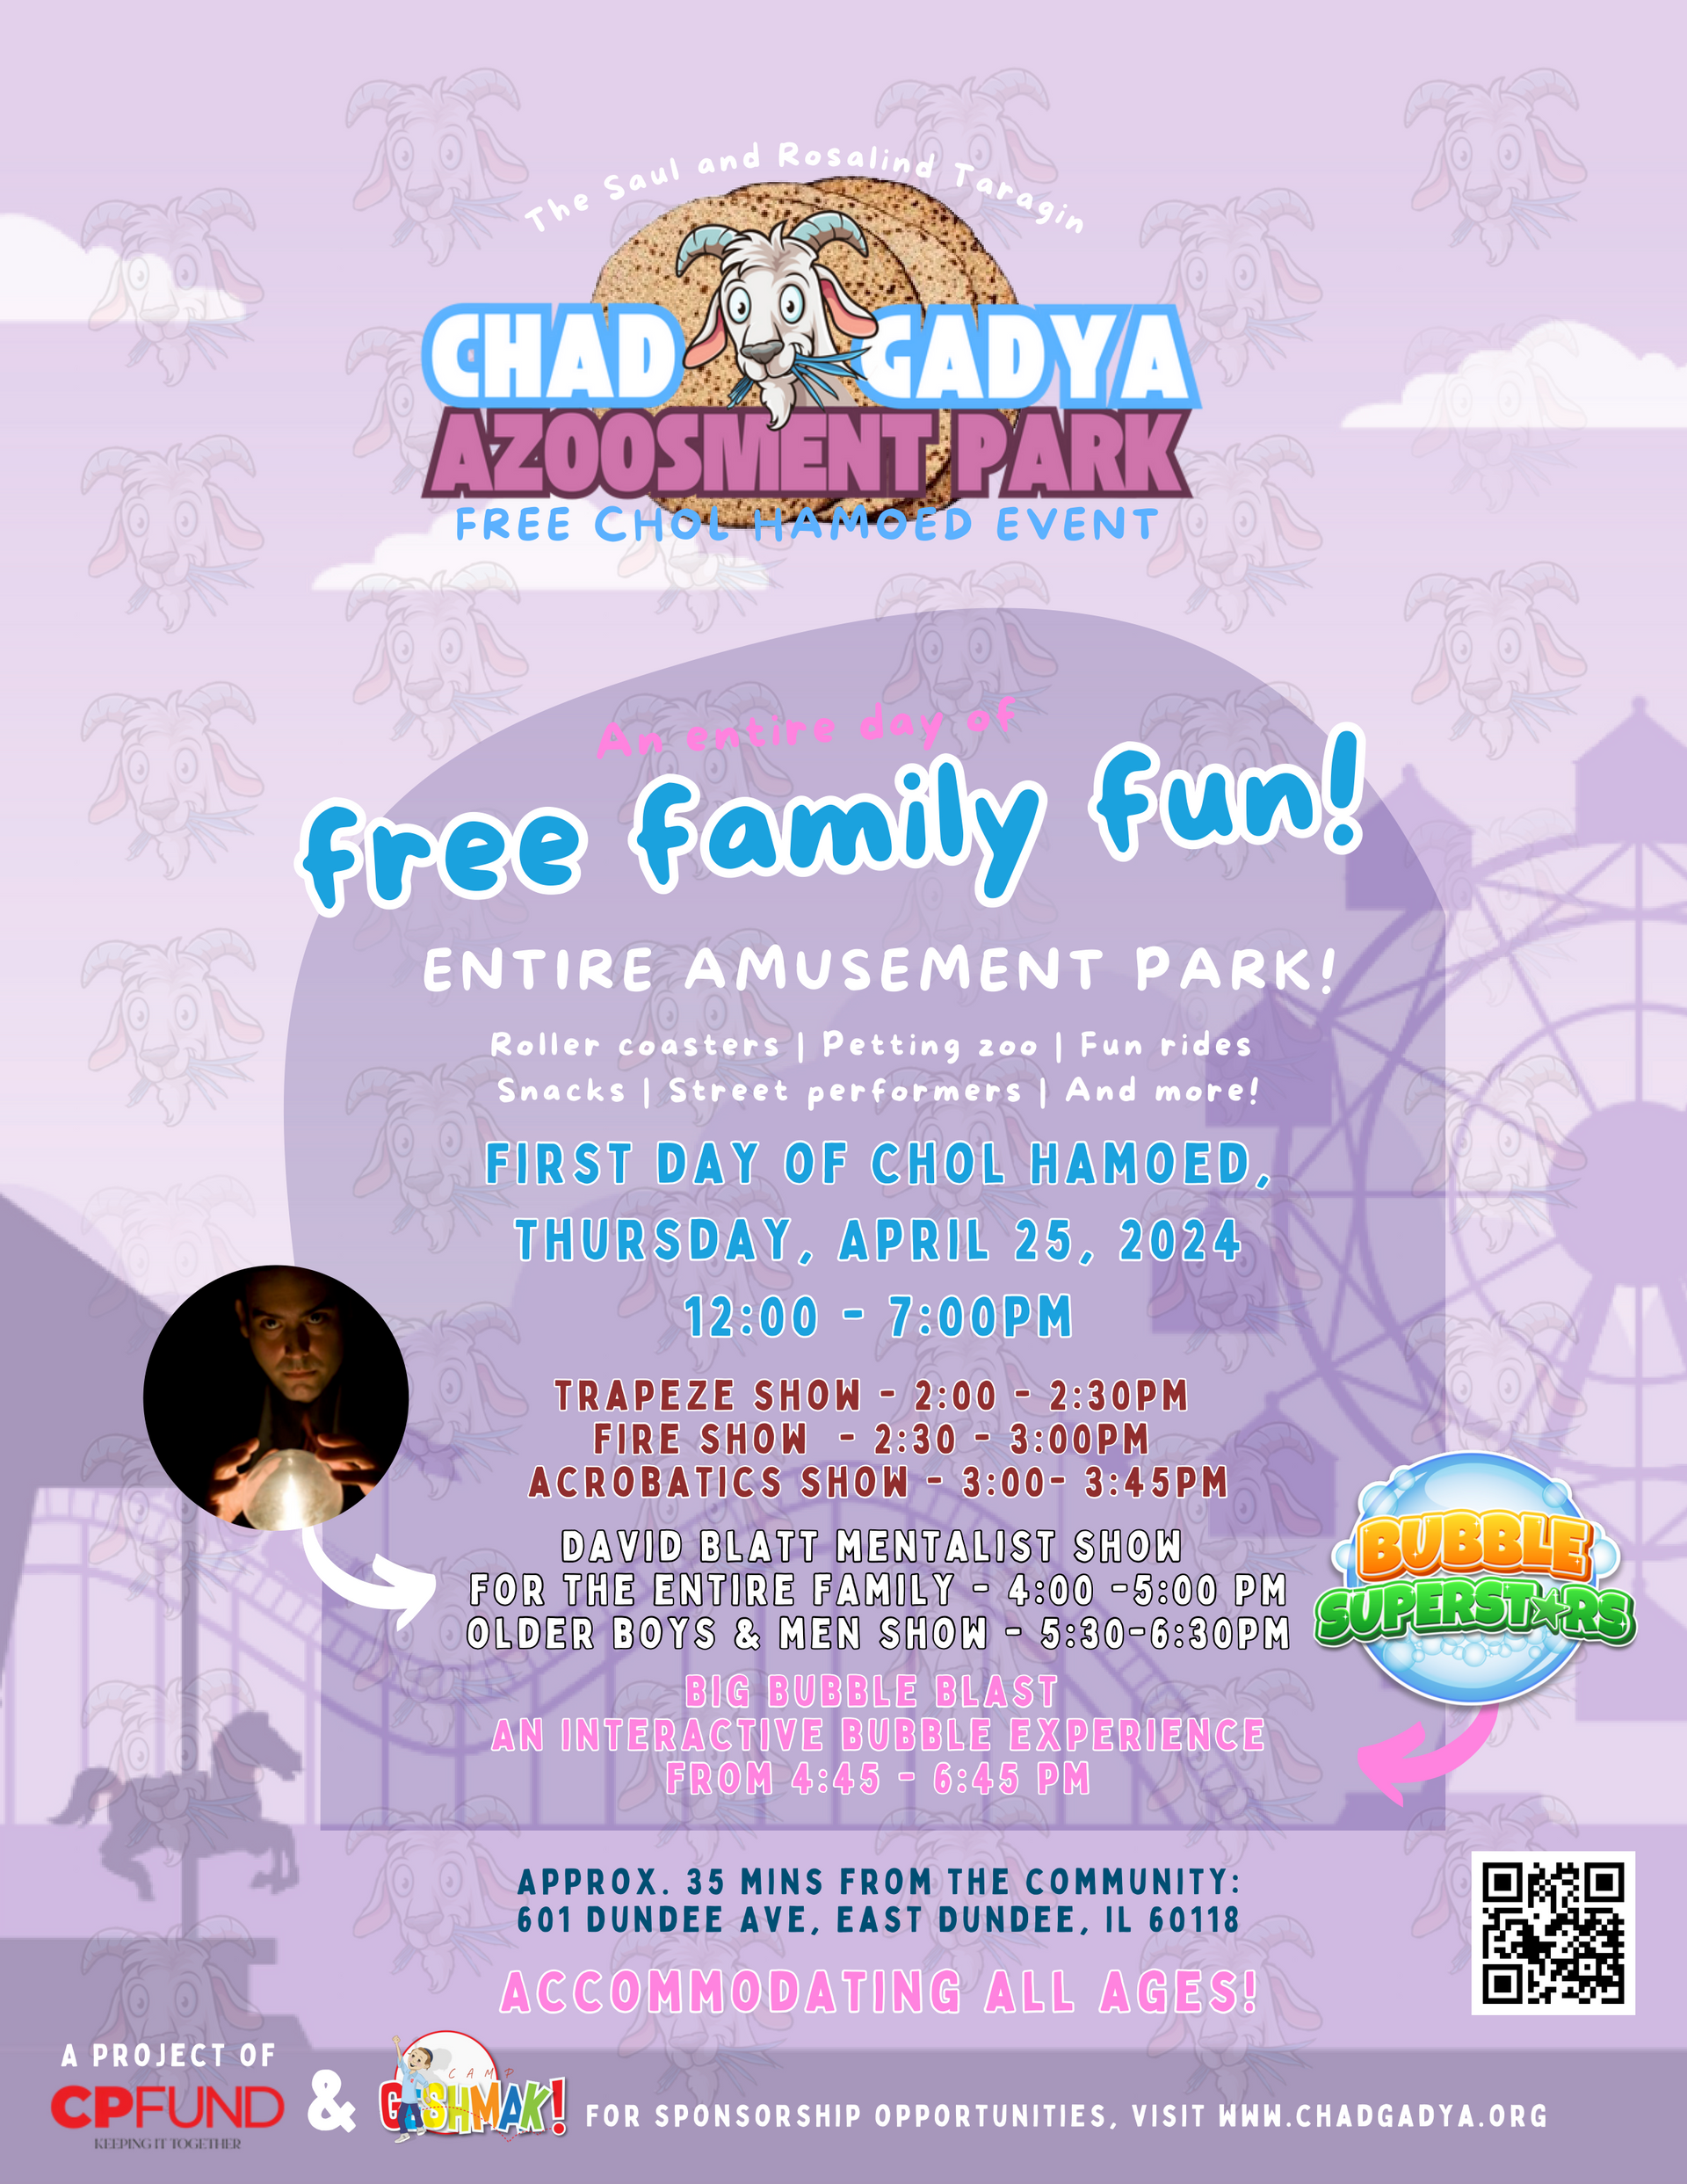 The Saul and Rosalind Taragin Chad Gadya Azoosment Park - Free Chol Hamoed Event - An Entire day of family fun! Entire Amuzement park! 